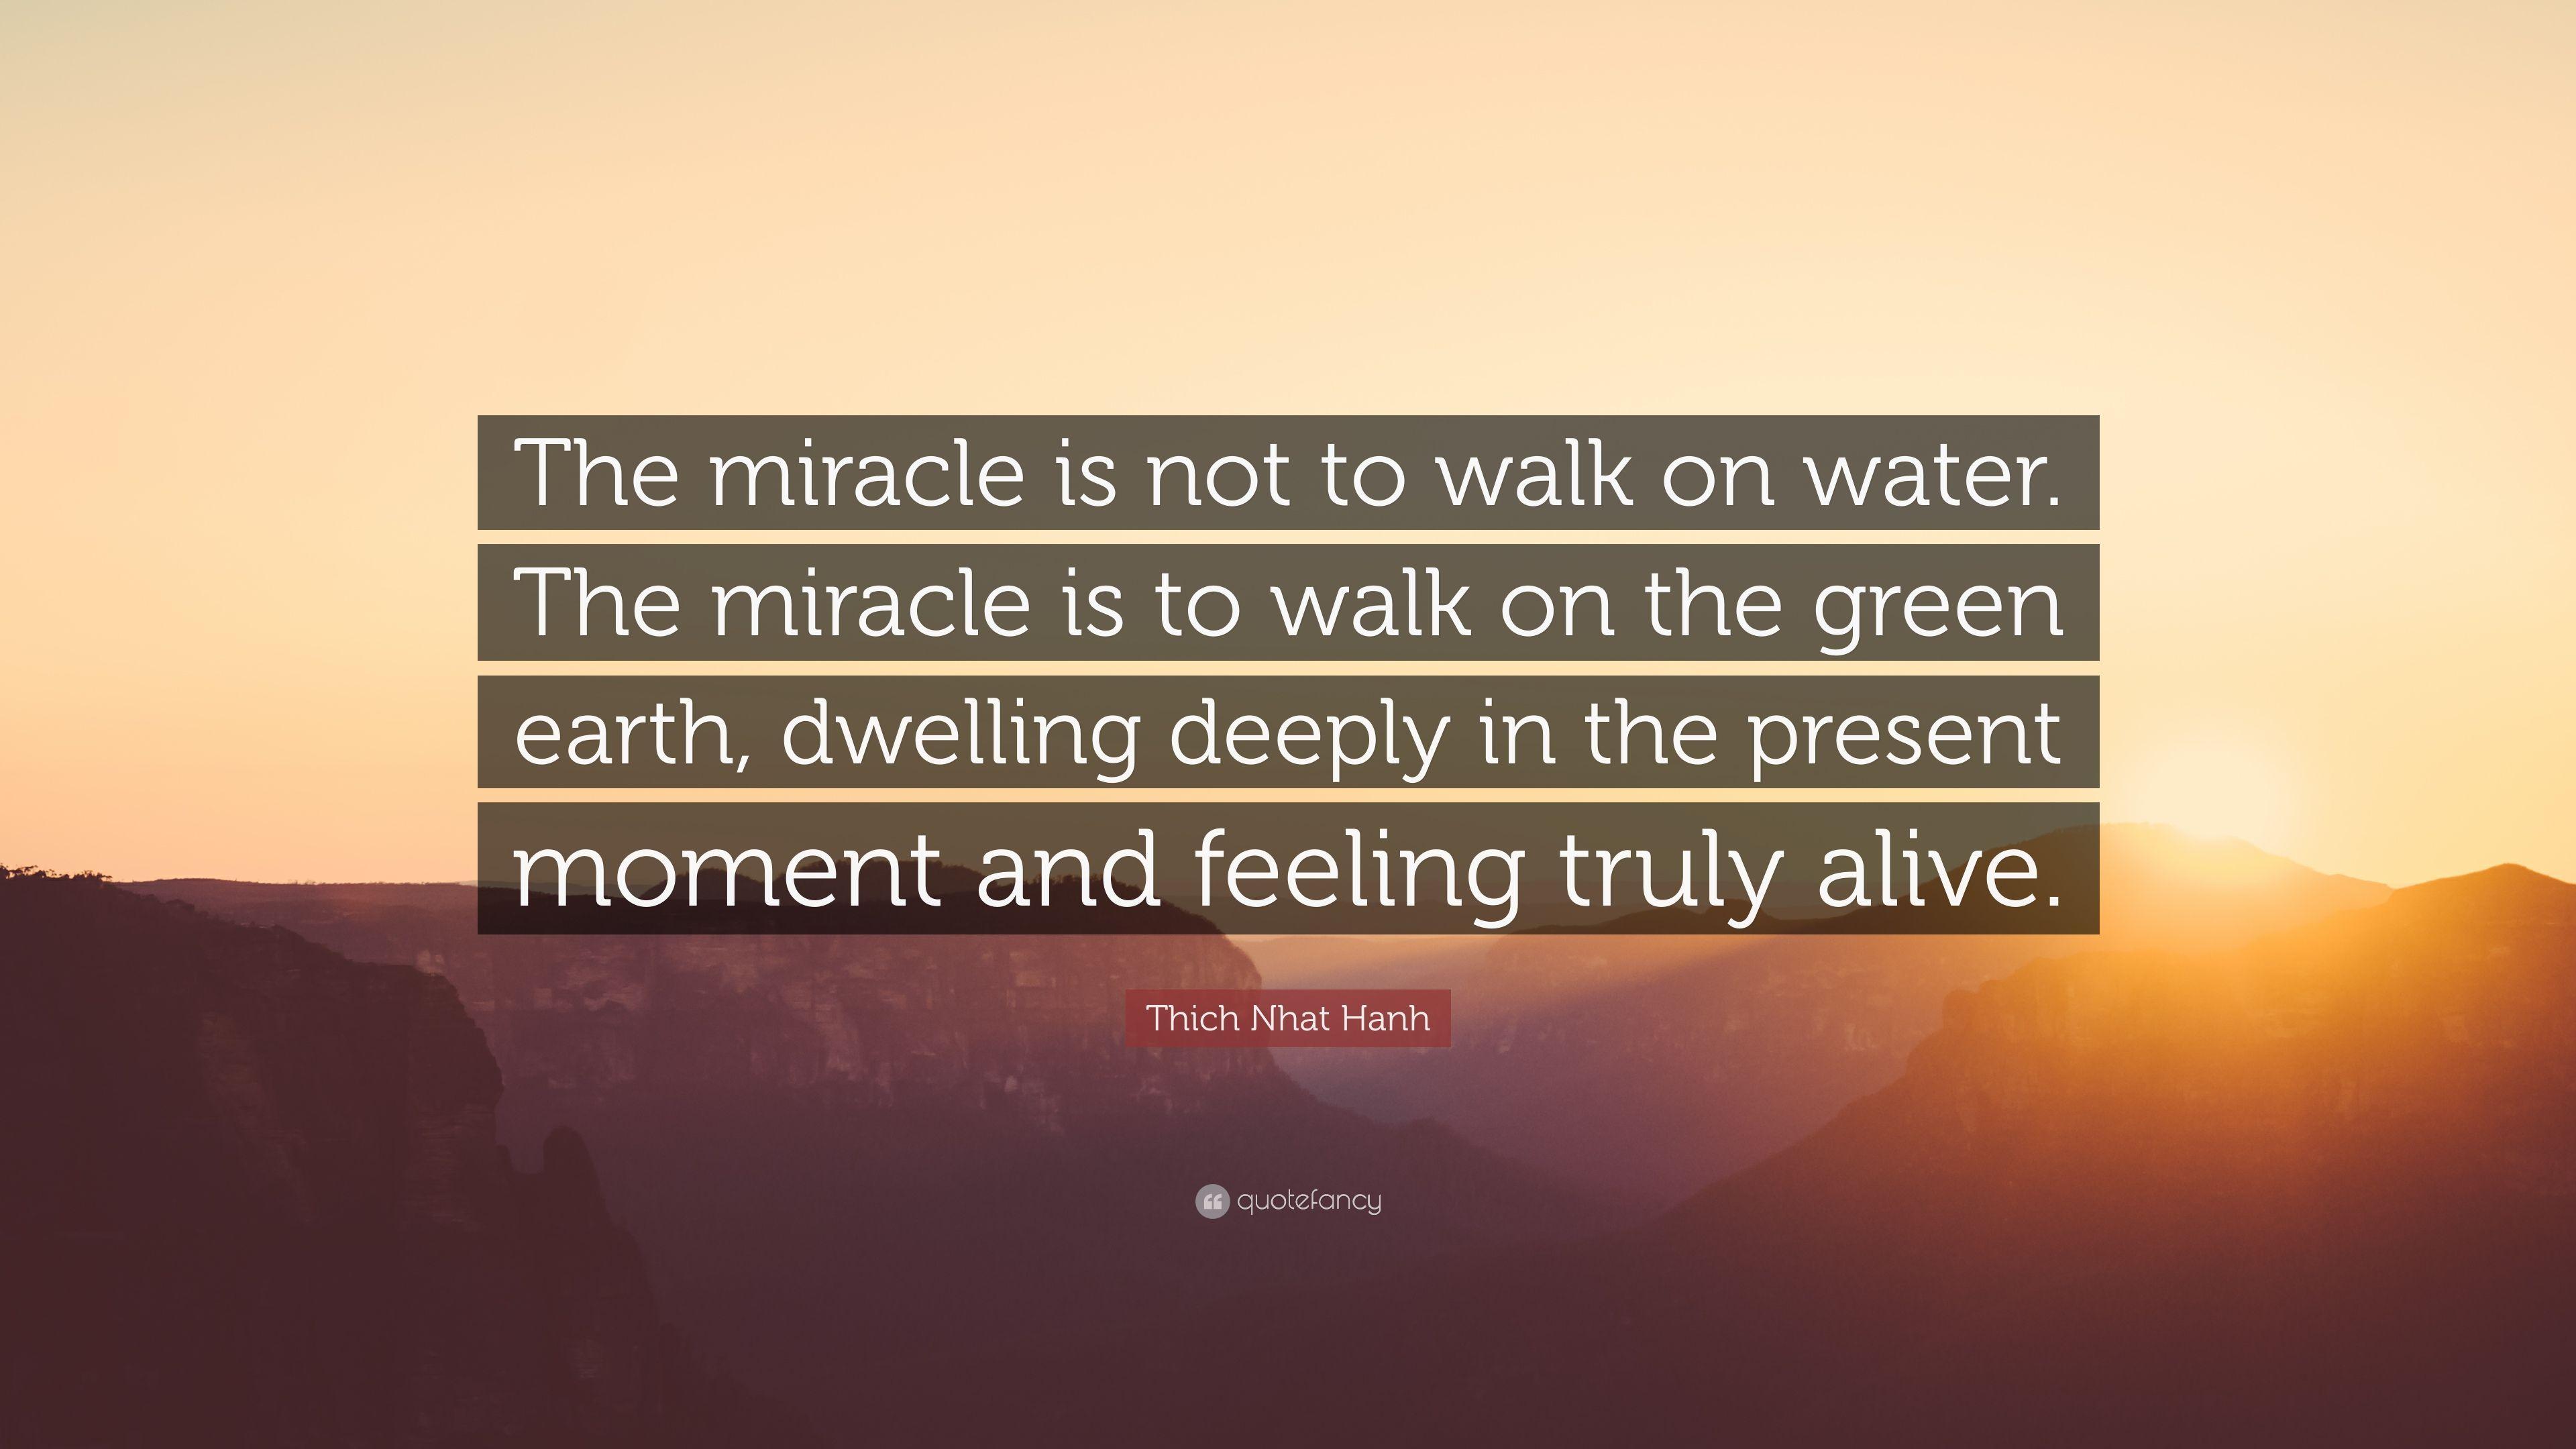 Thich Nhat Hanh Quote: “The miracle is not to walk on water